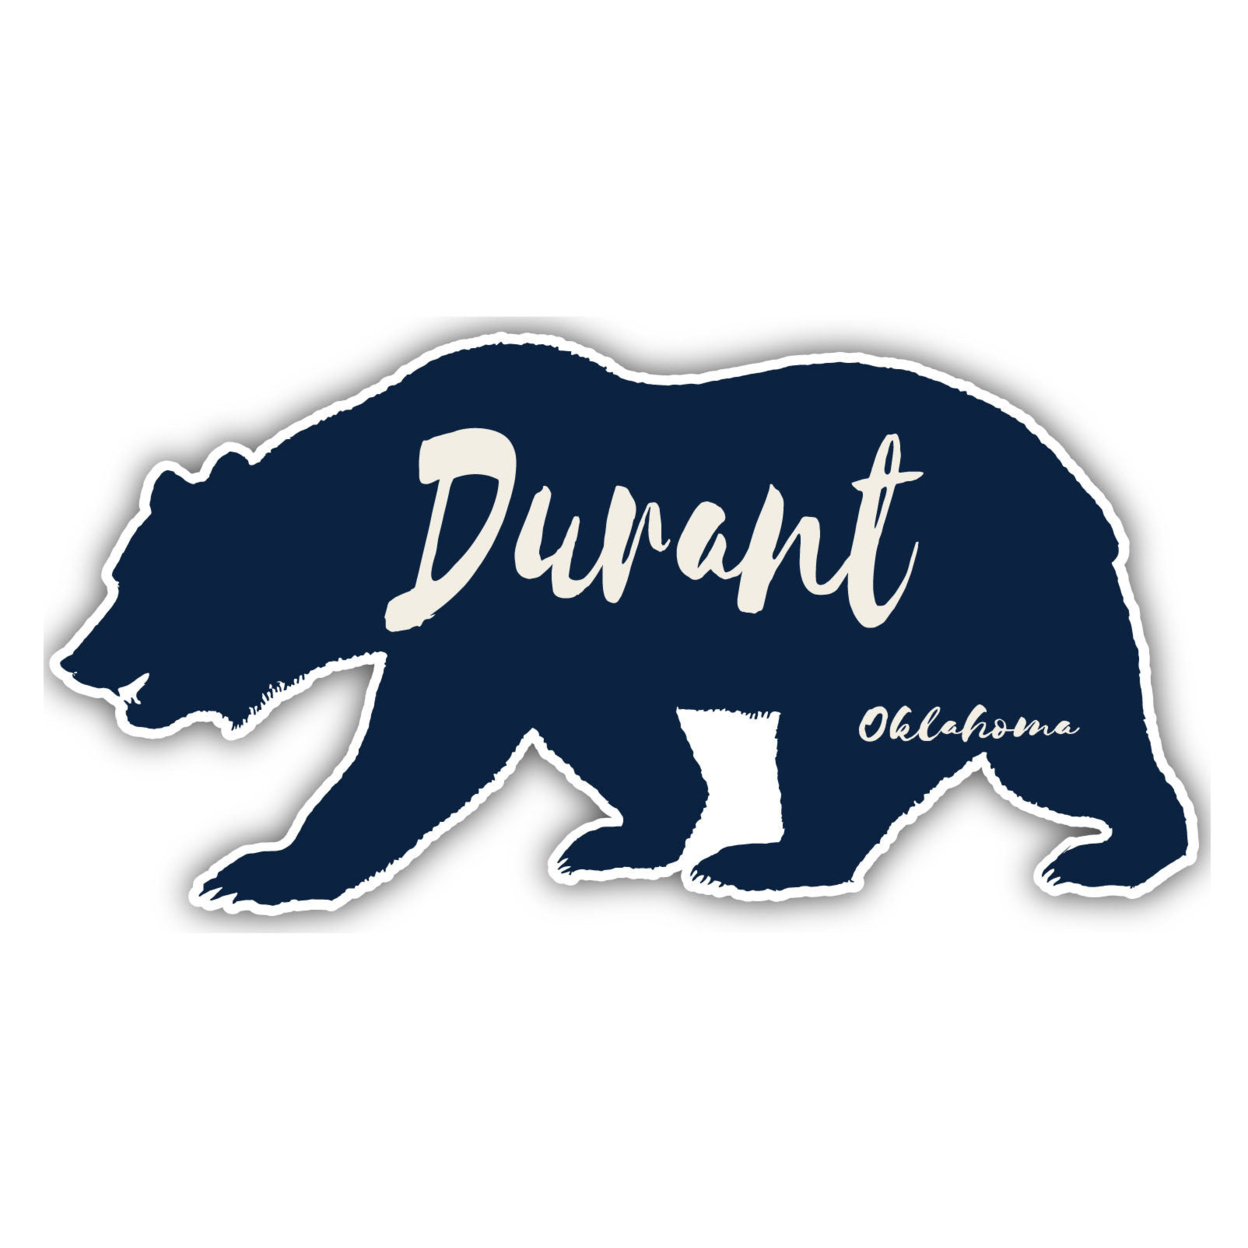 Durant Oklahoma Souvenir Decorative Stickers (Choose Theme And Size) - 4-Pack, 8-Inch, Bear